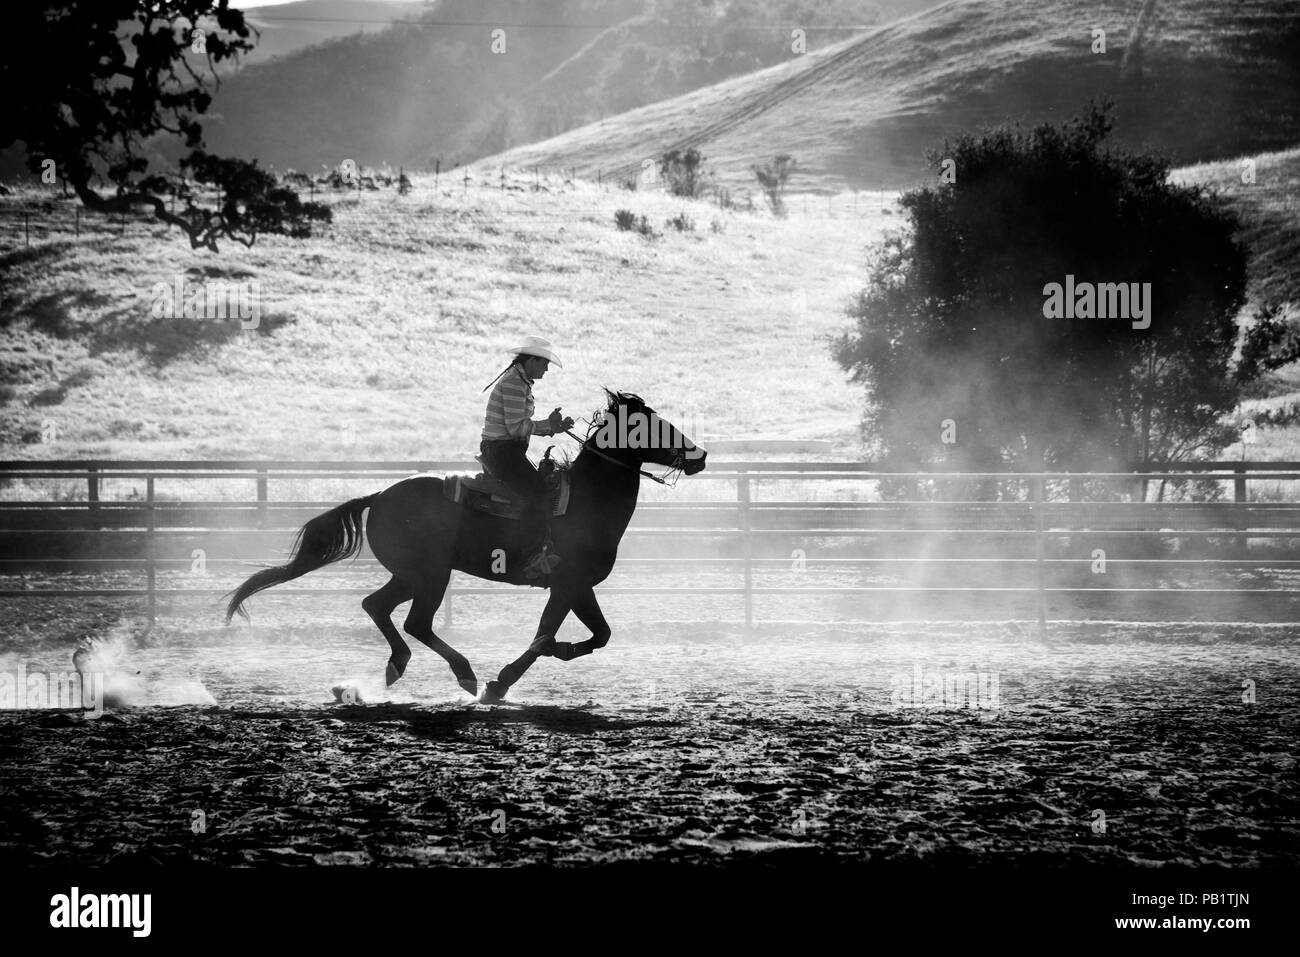 A black and white silhouette of a real cowgirl woman wrangler on horseback galloping with fence and hills behind in a horizontal action shot. Stock Photo